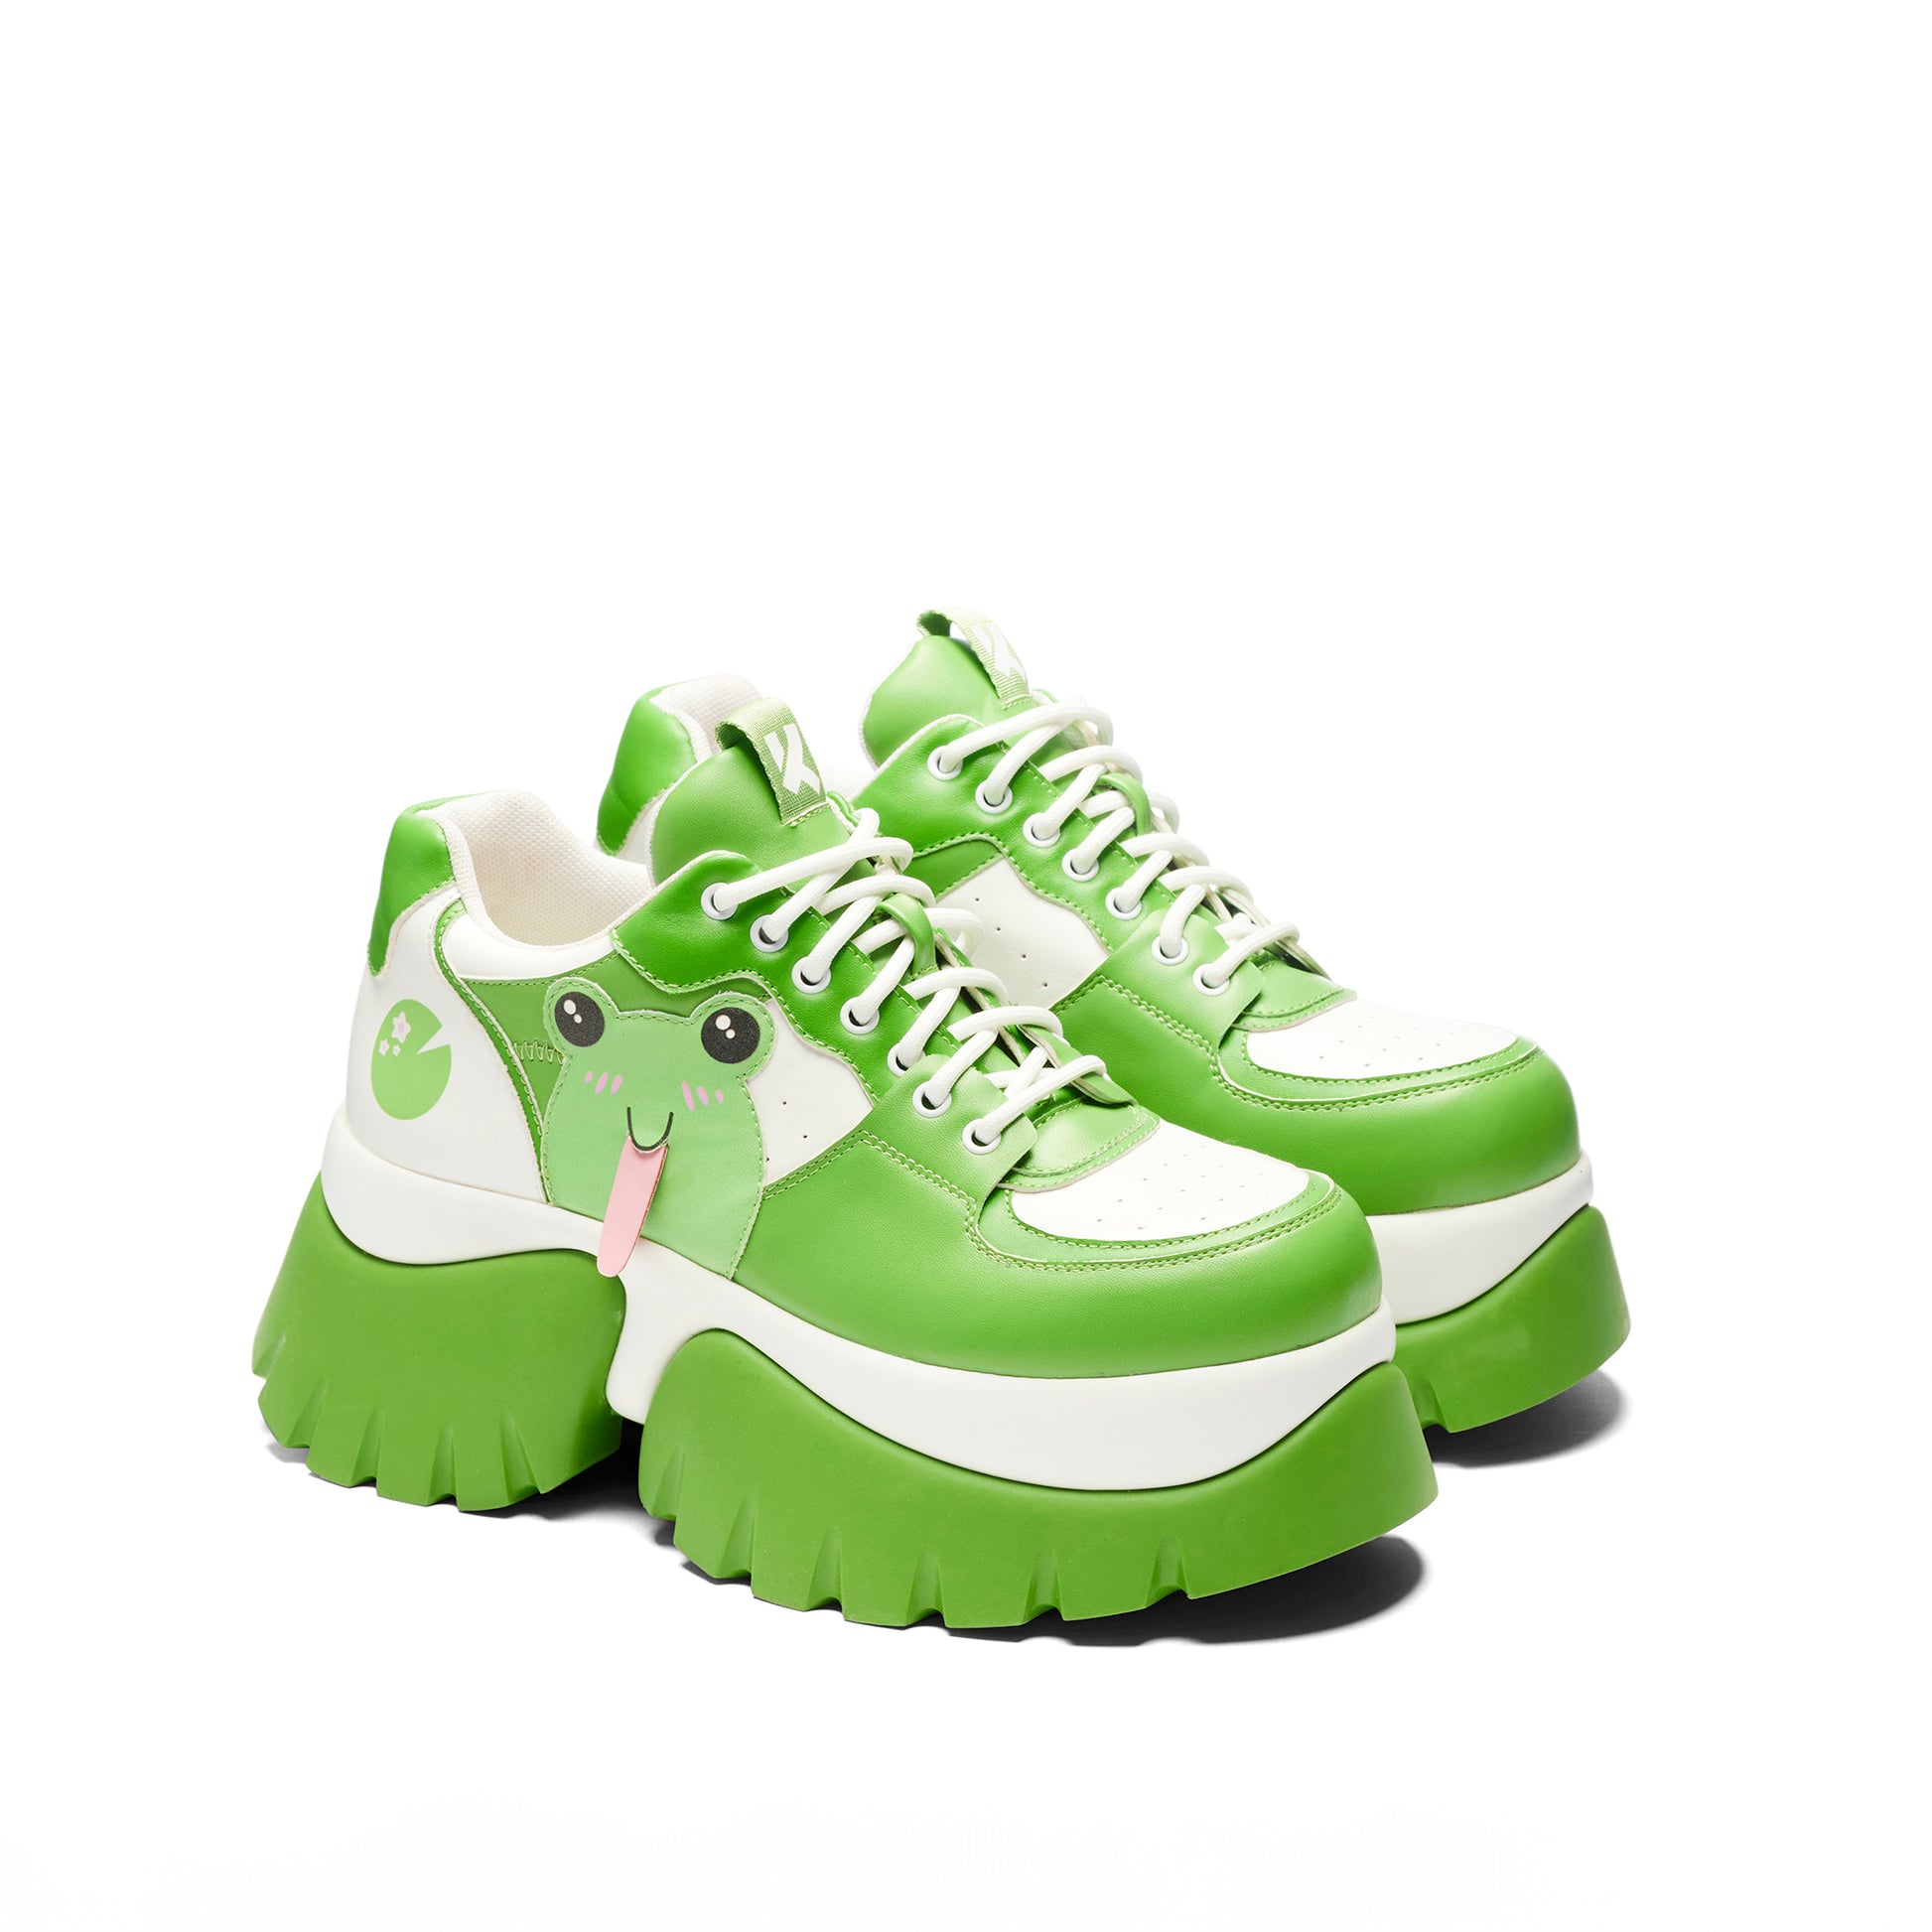 Fwoggy Woggy Says Hi Chunky Trainers - Green - Koi Footwear - Three-Quarter View